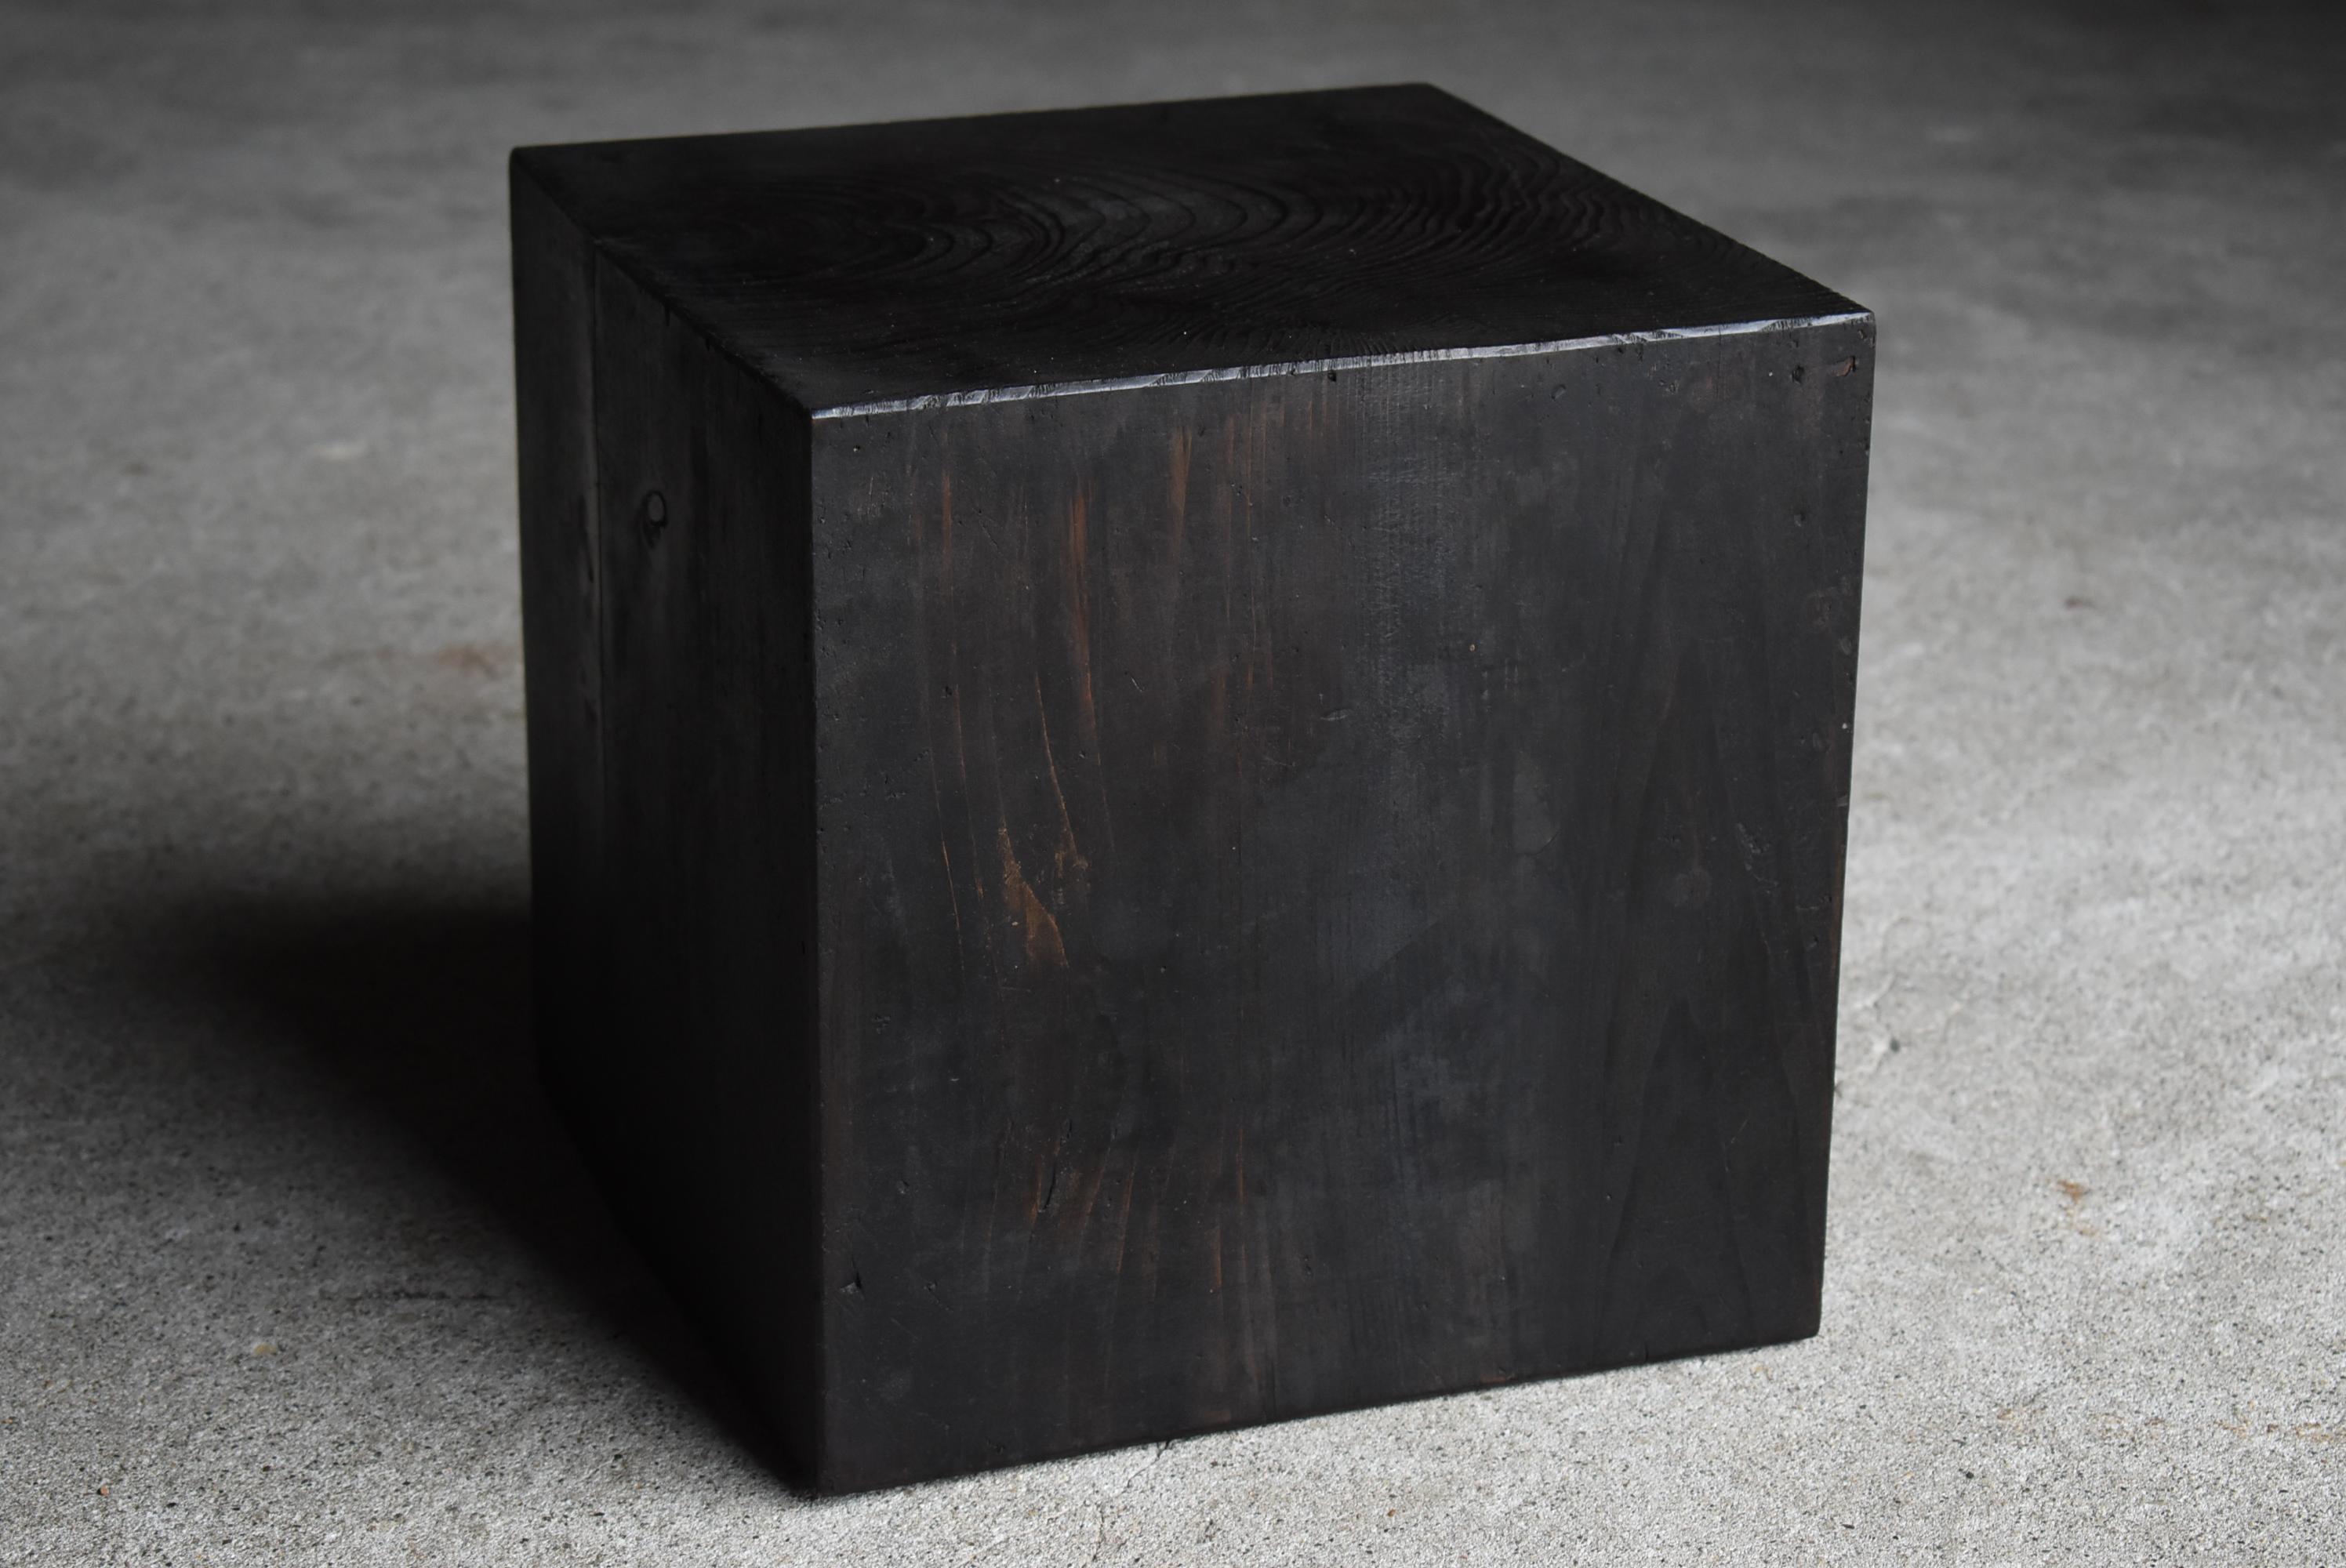 Mid-20th Century Japanese Old Wooden Block Stool 1940s-1960s / Primitive Side Chair Wabisabi